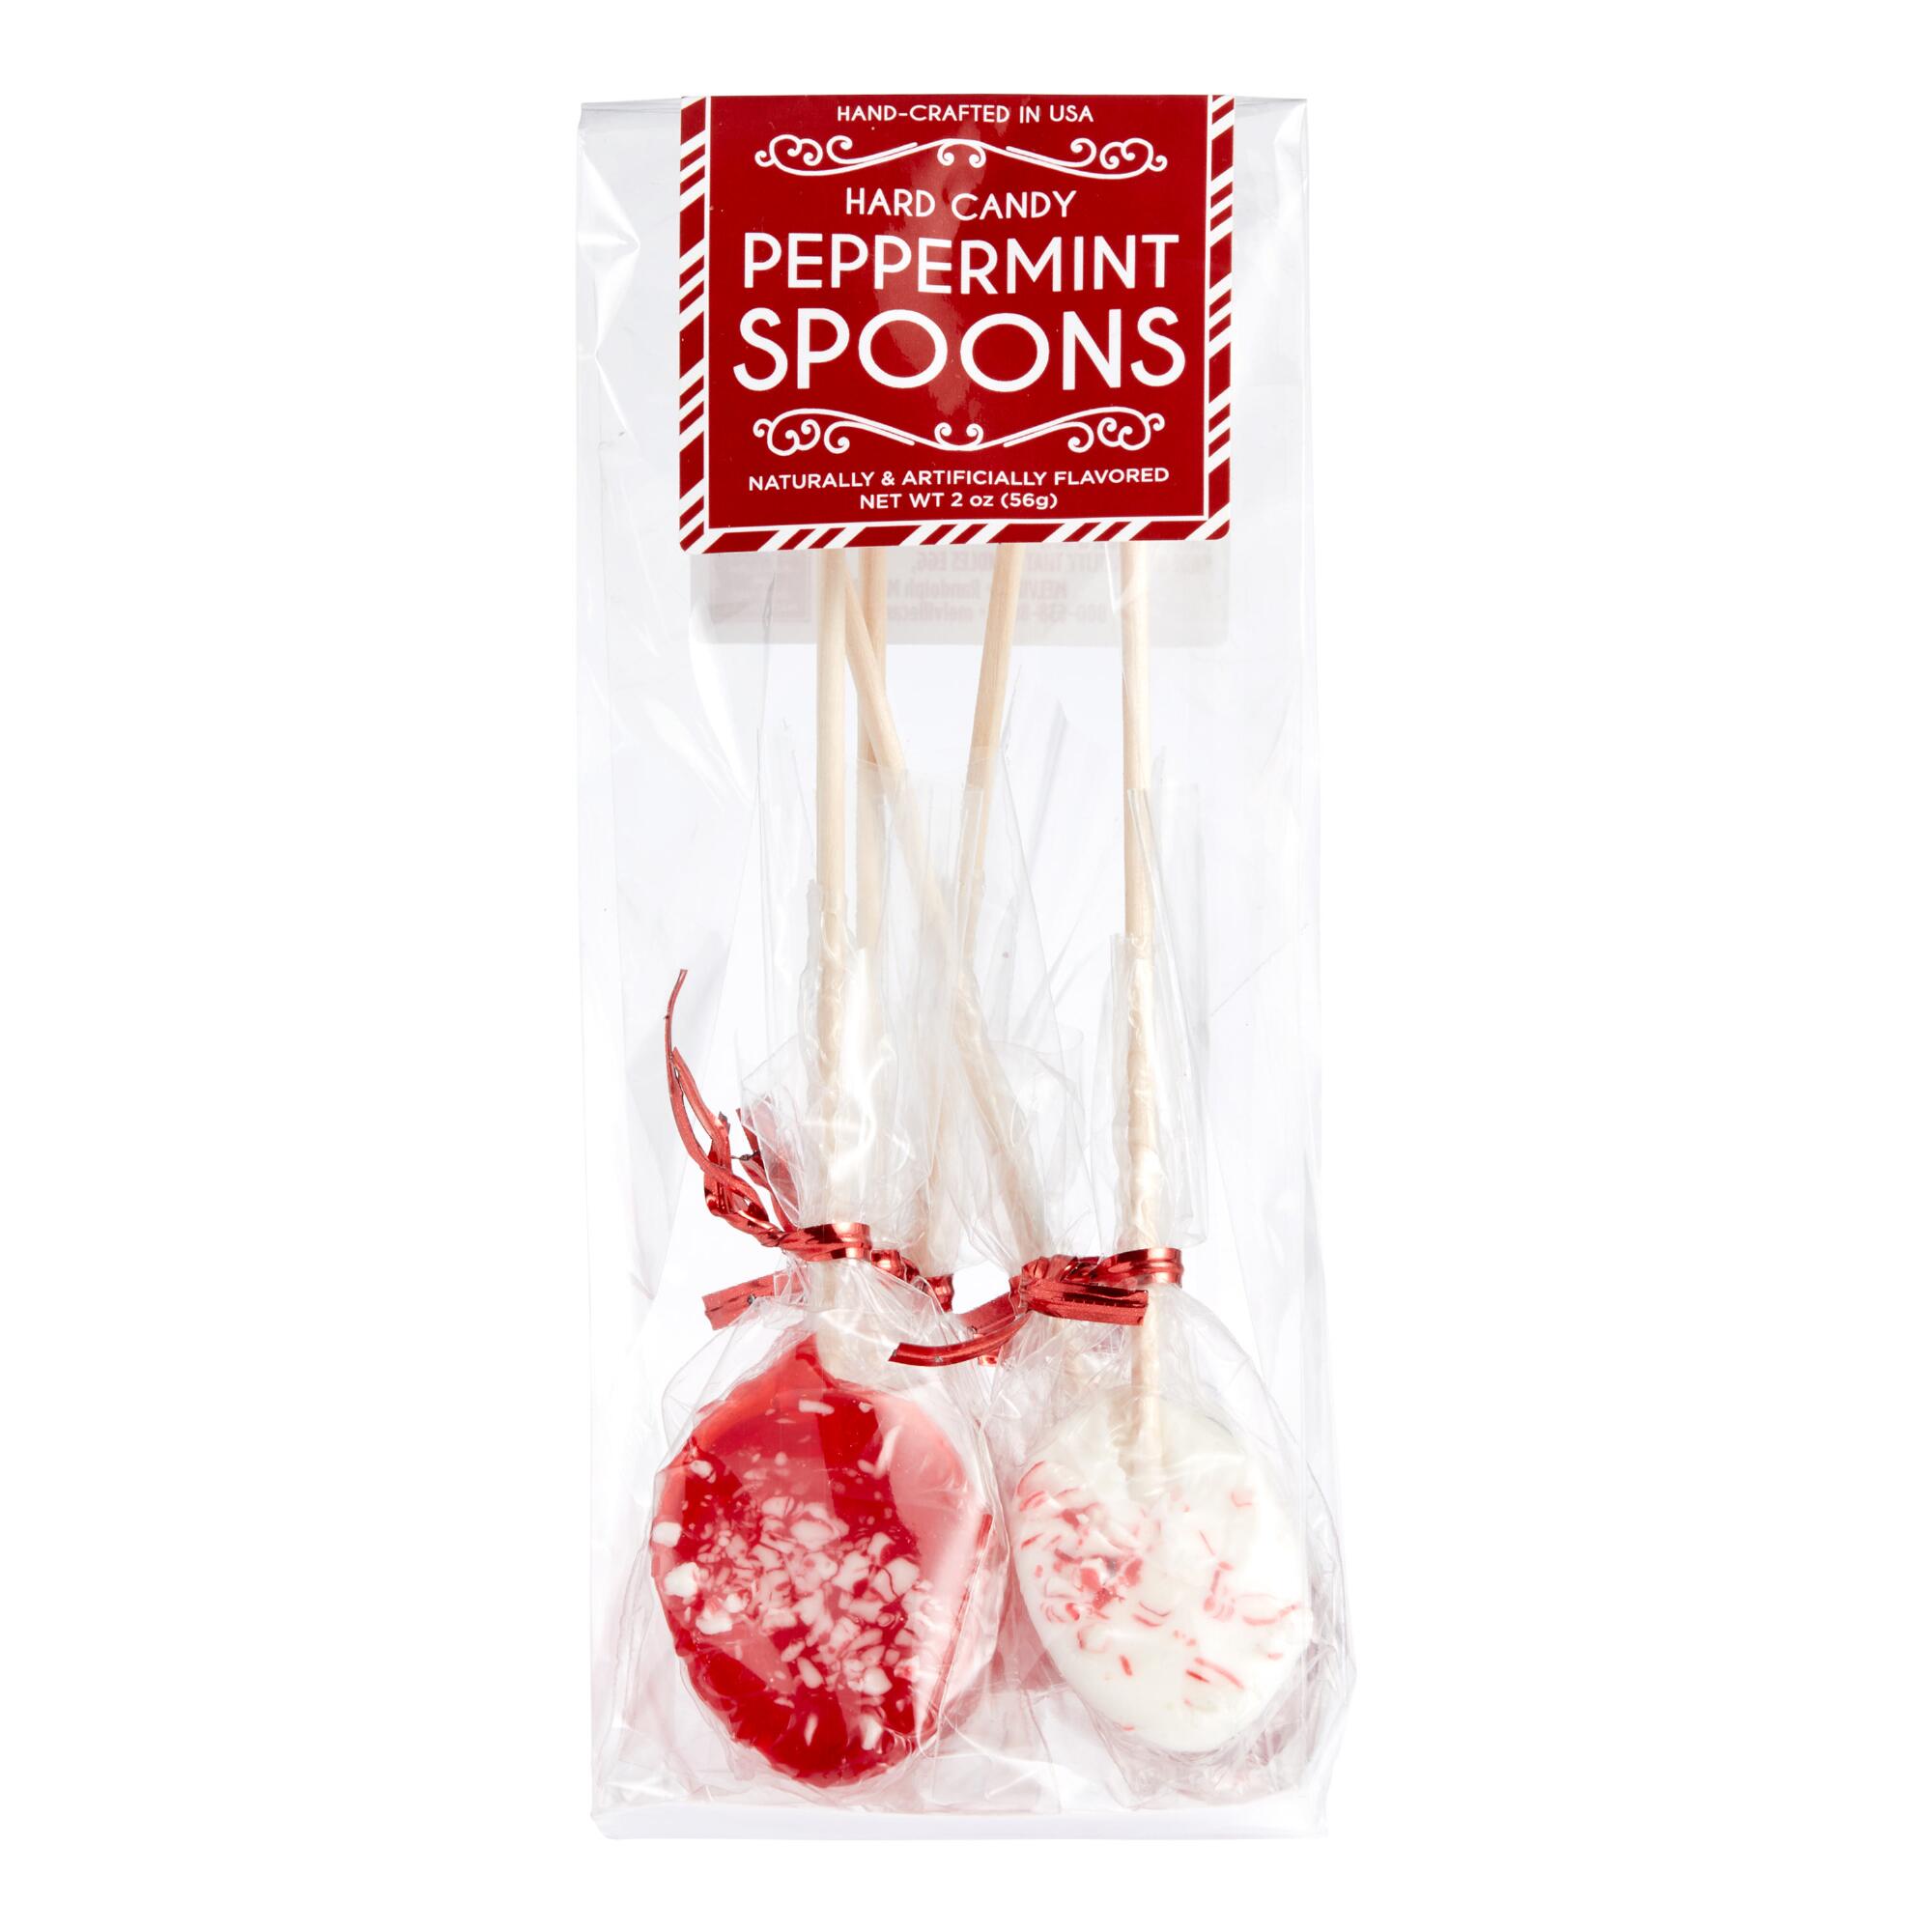 Hard Candy Peppermint Spoons 5 Pack by World Market